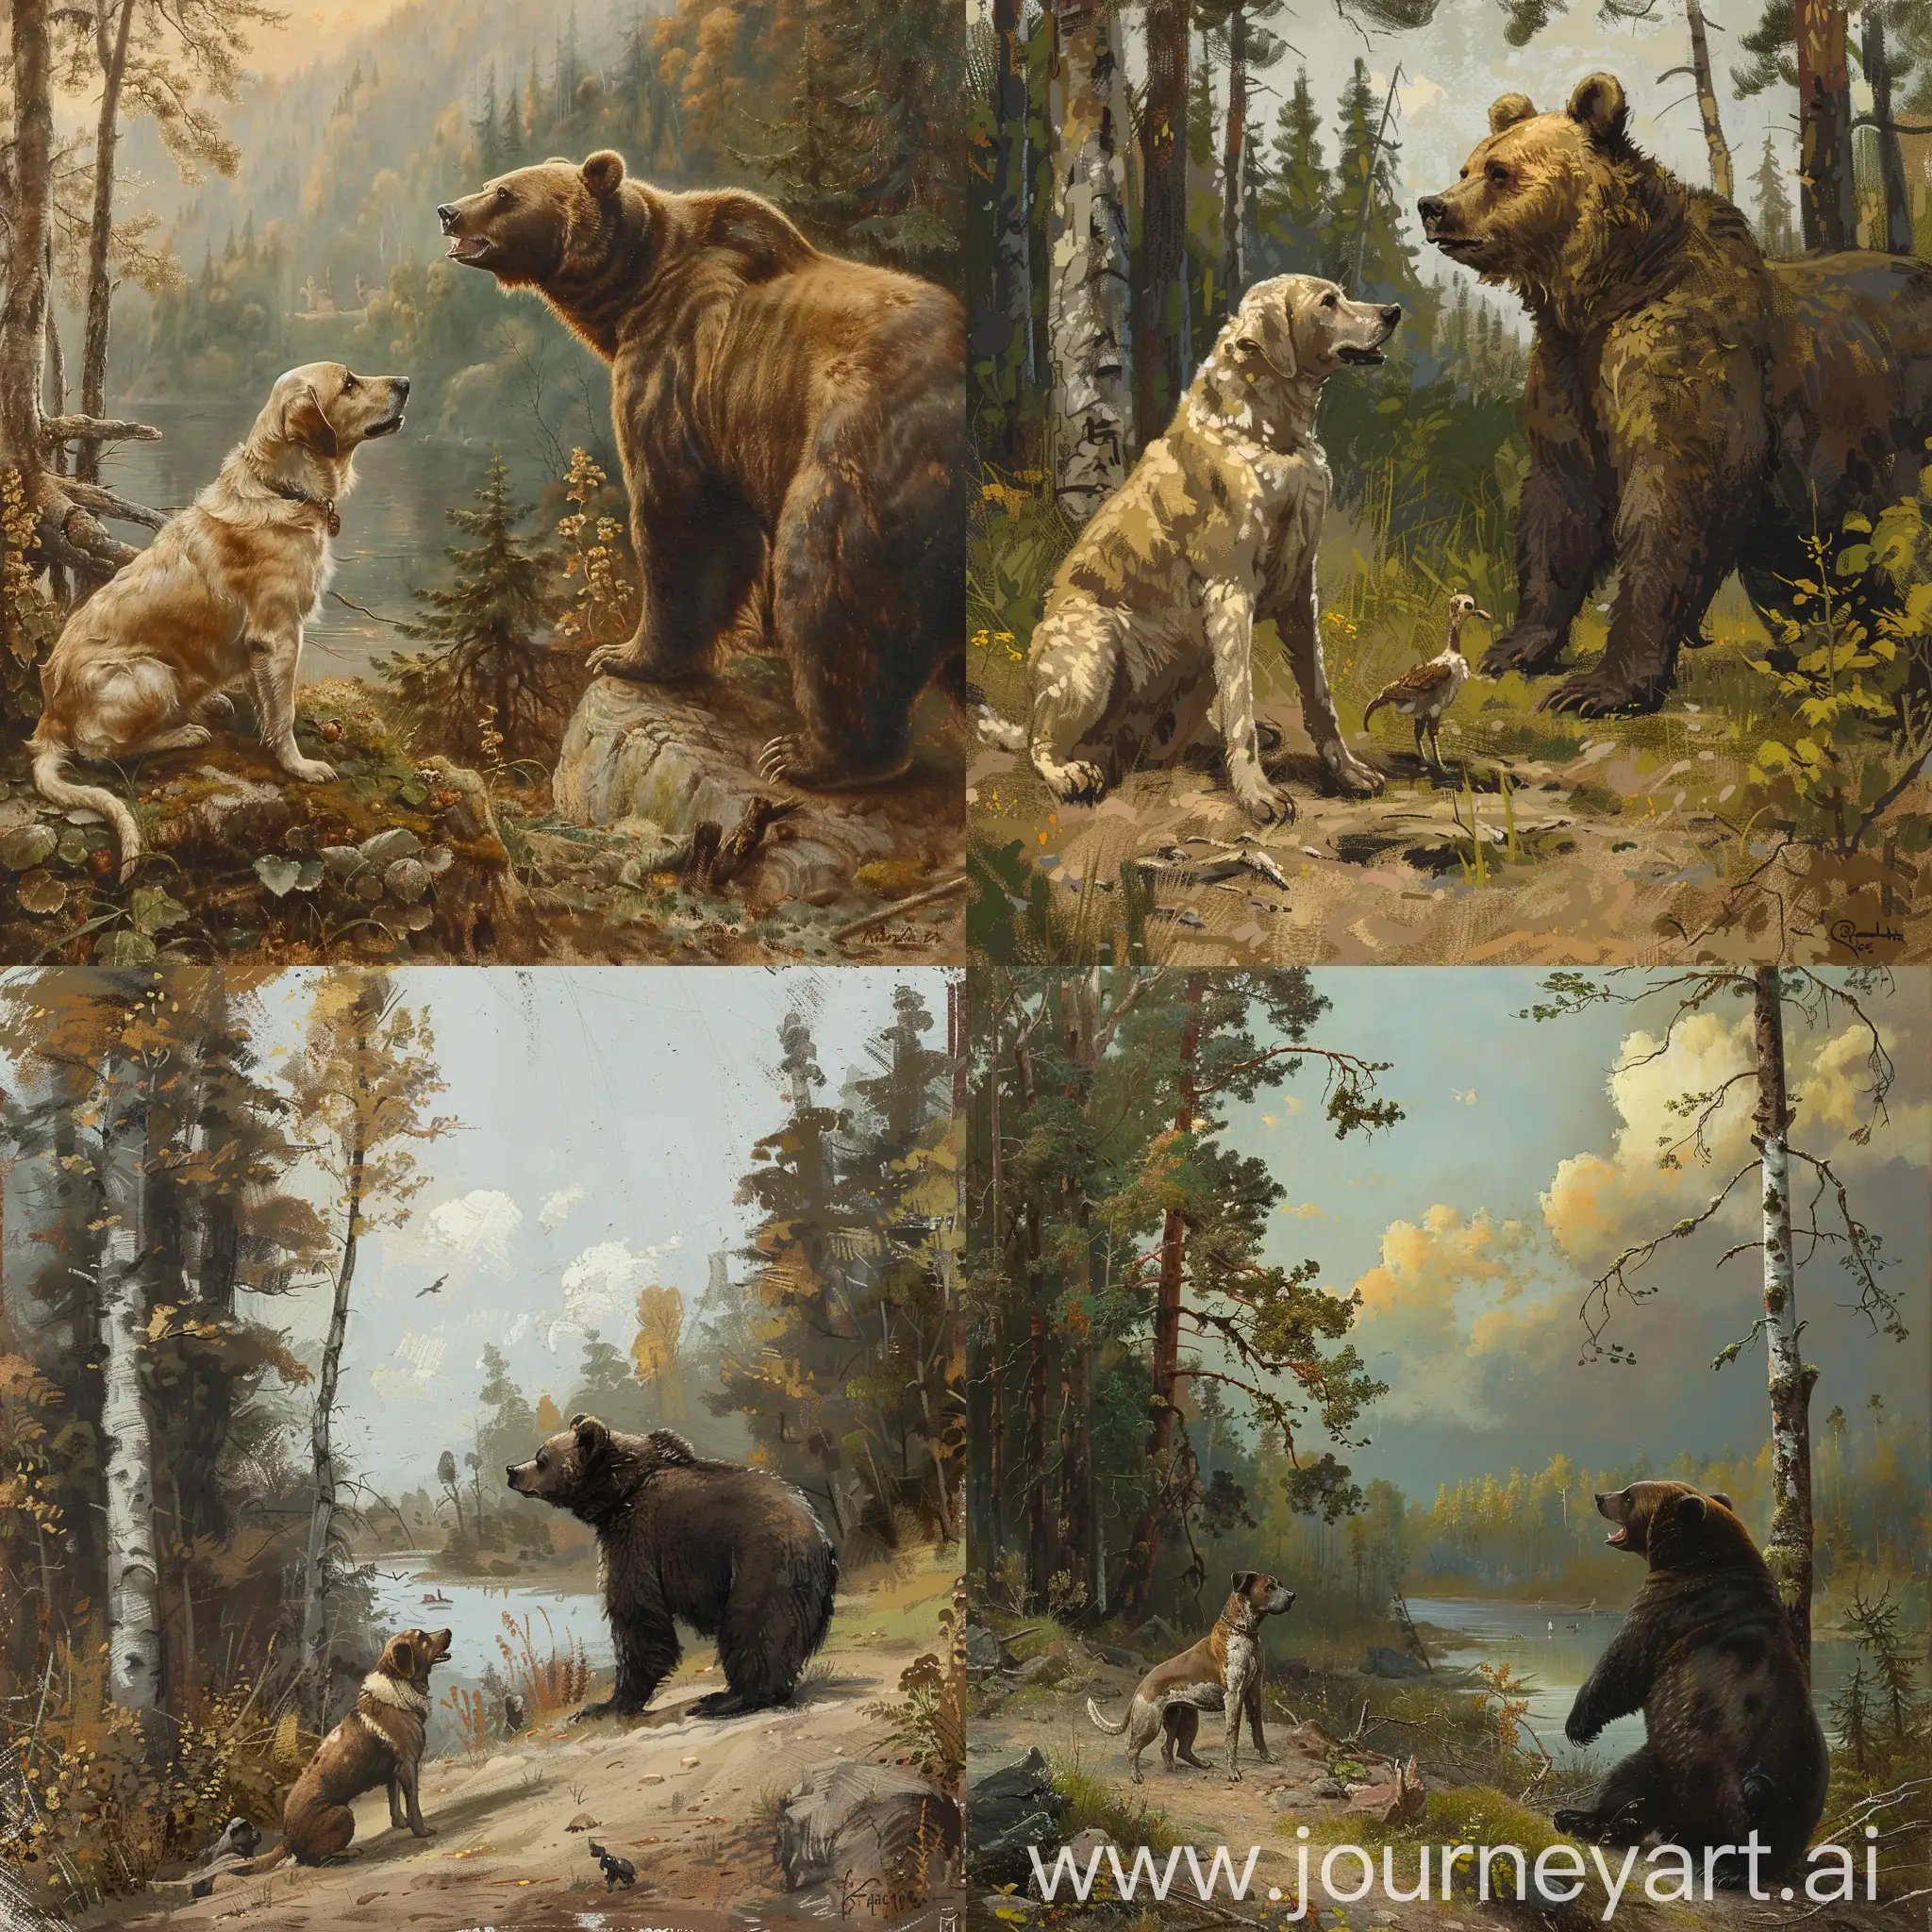 Conversation-between-an-Elderly-Dog-and-a-Bear-at-Forests-Edge